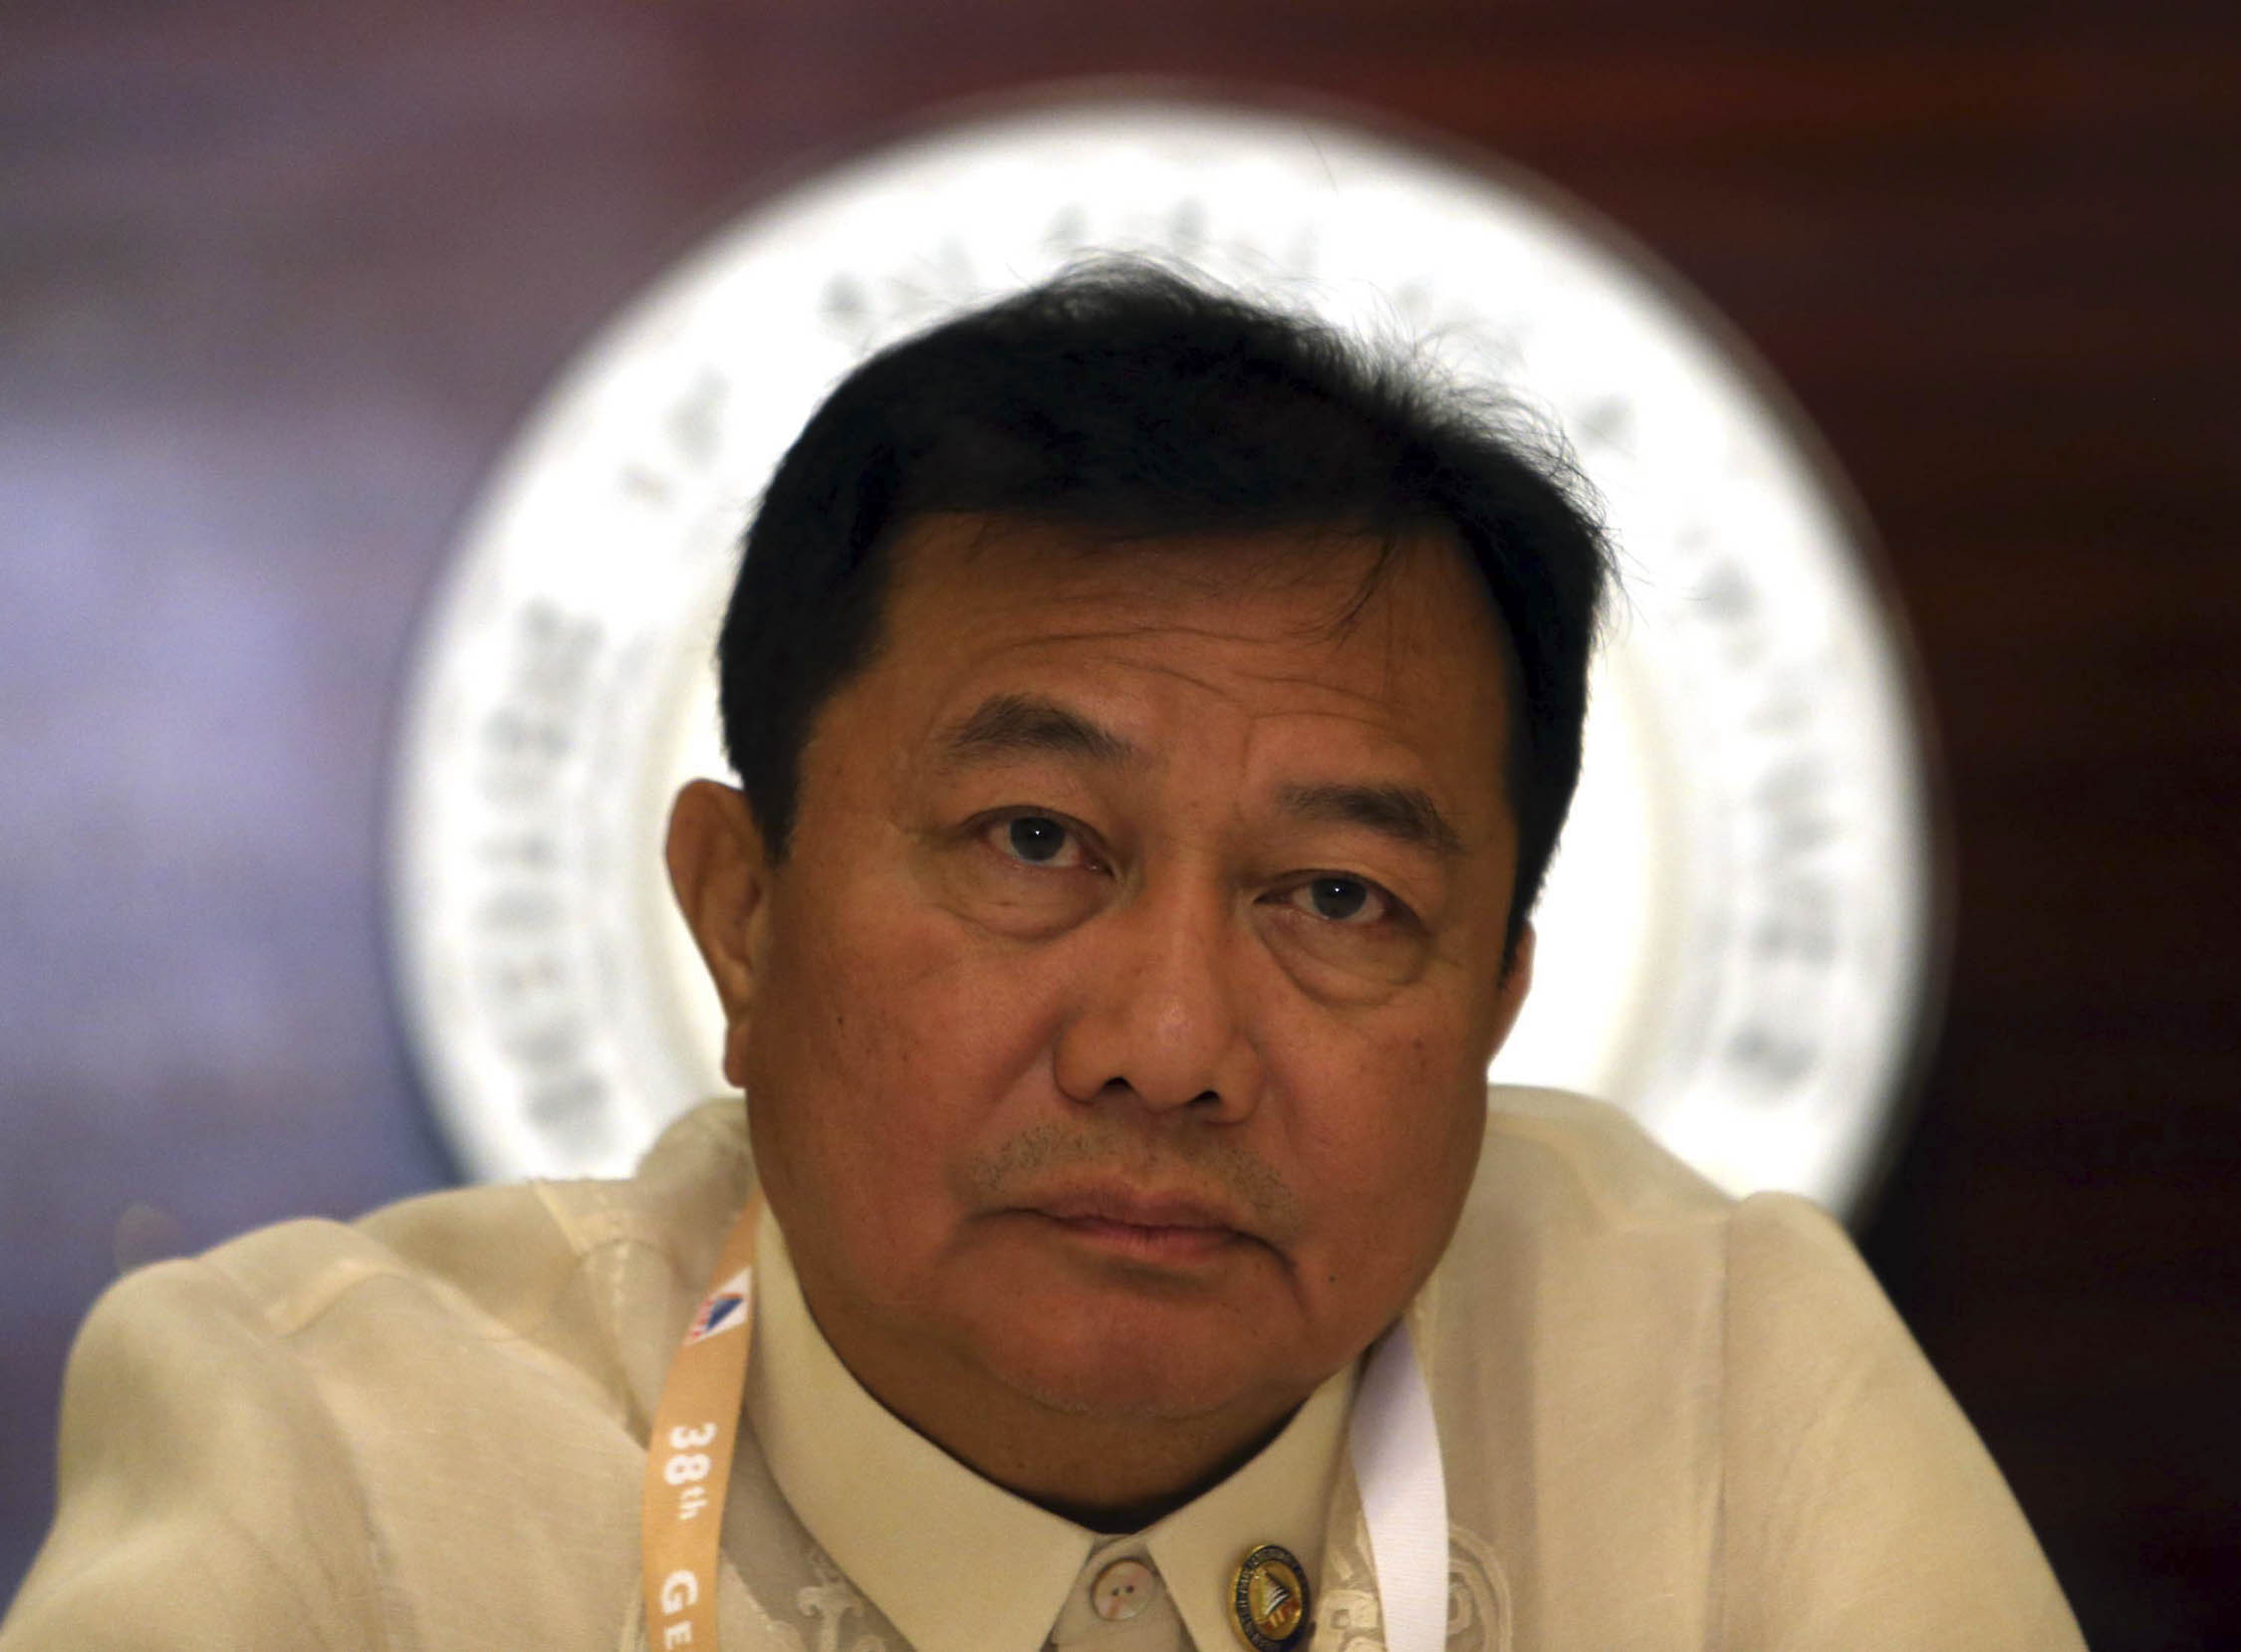 Former speaker and now Davao del Norte 1st District Rep. Pantaleon Alvarez believes the current administration lost a capable worker in government with the resignation of Vice President Sara Duterte as Education secretary.